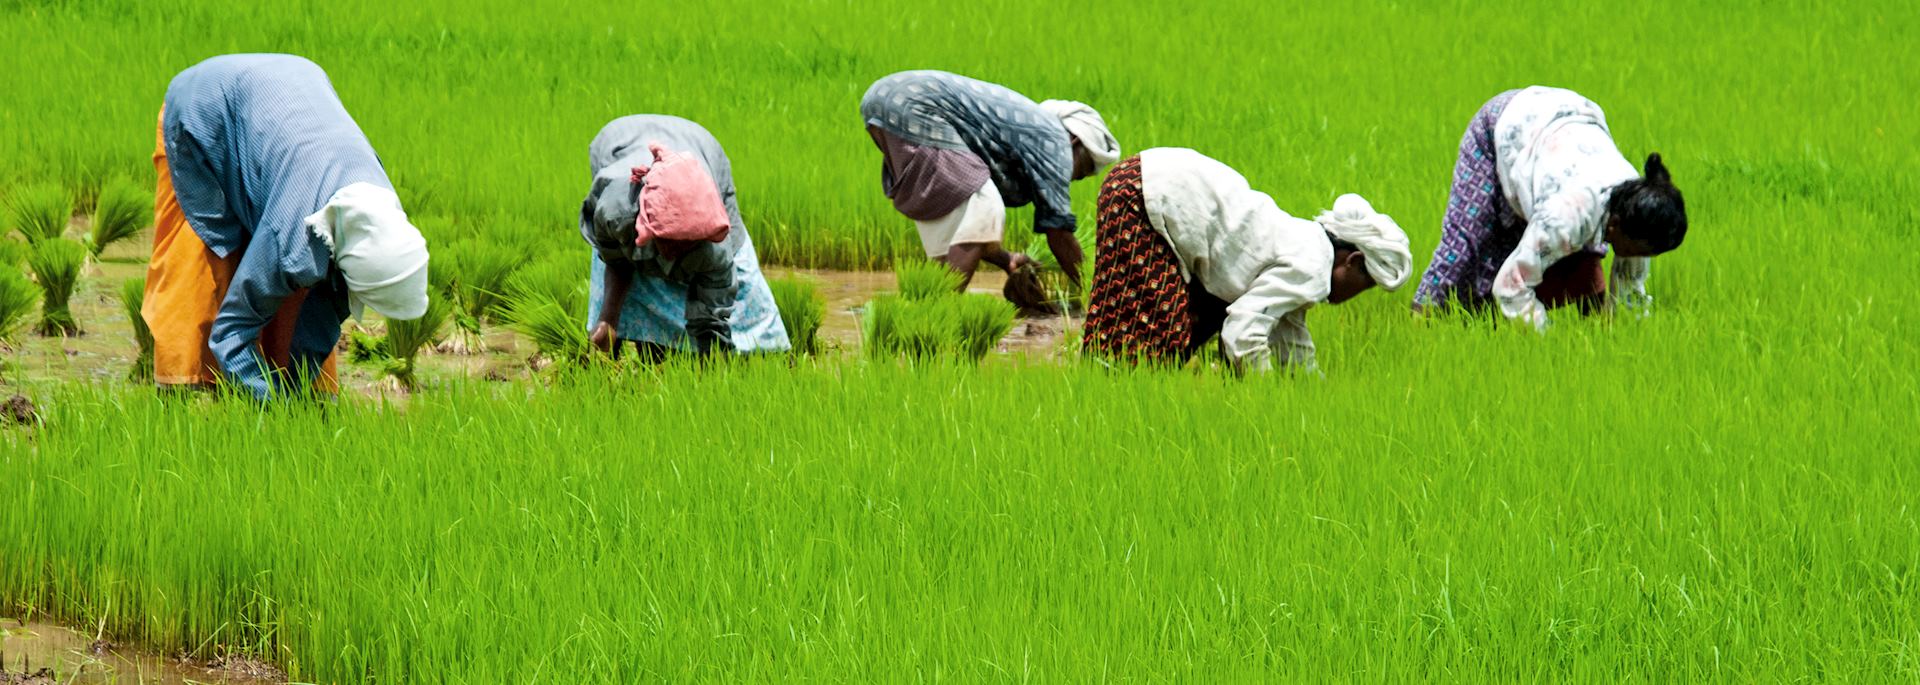 Workers in a paddy field in Palakkad